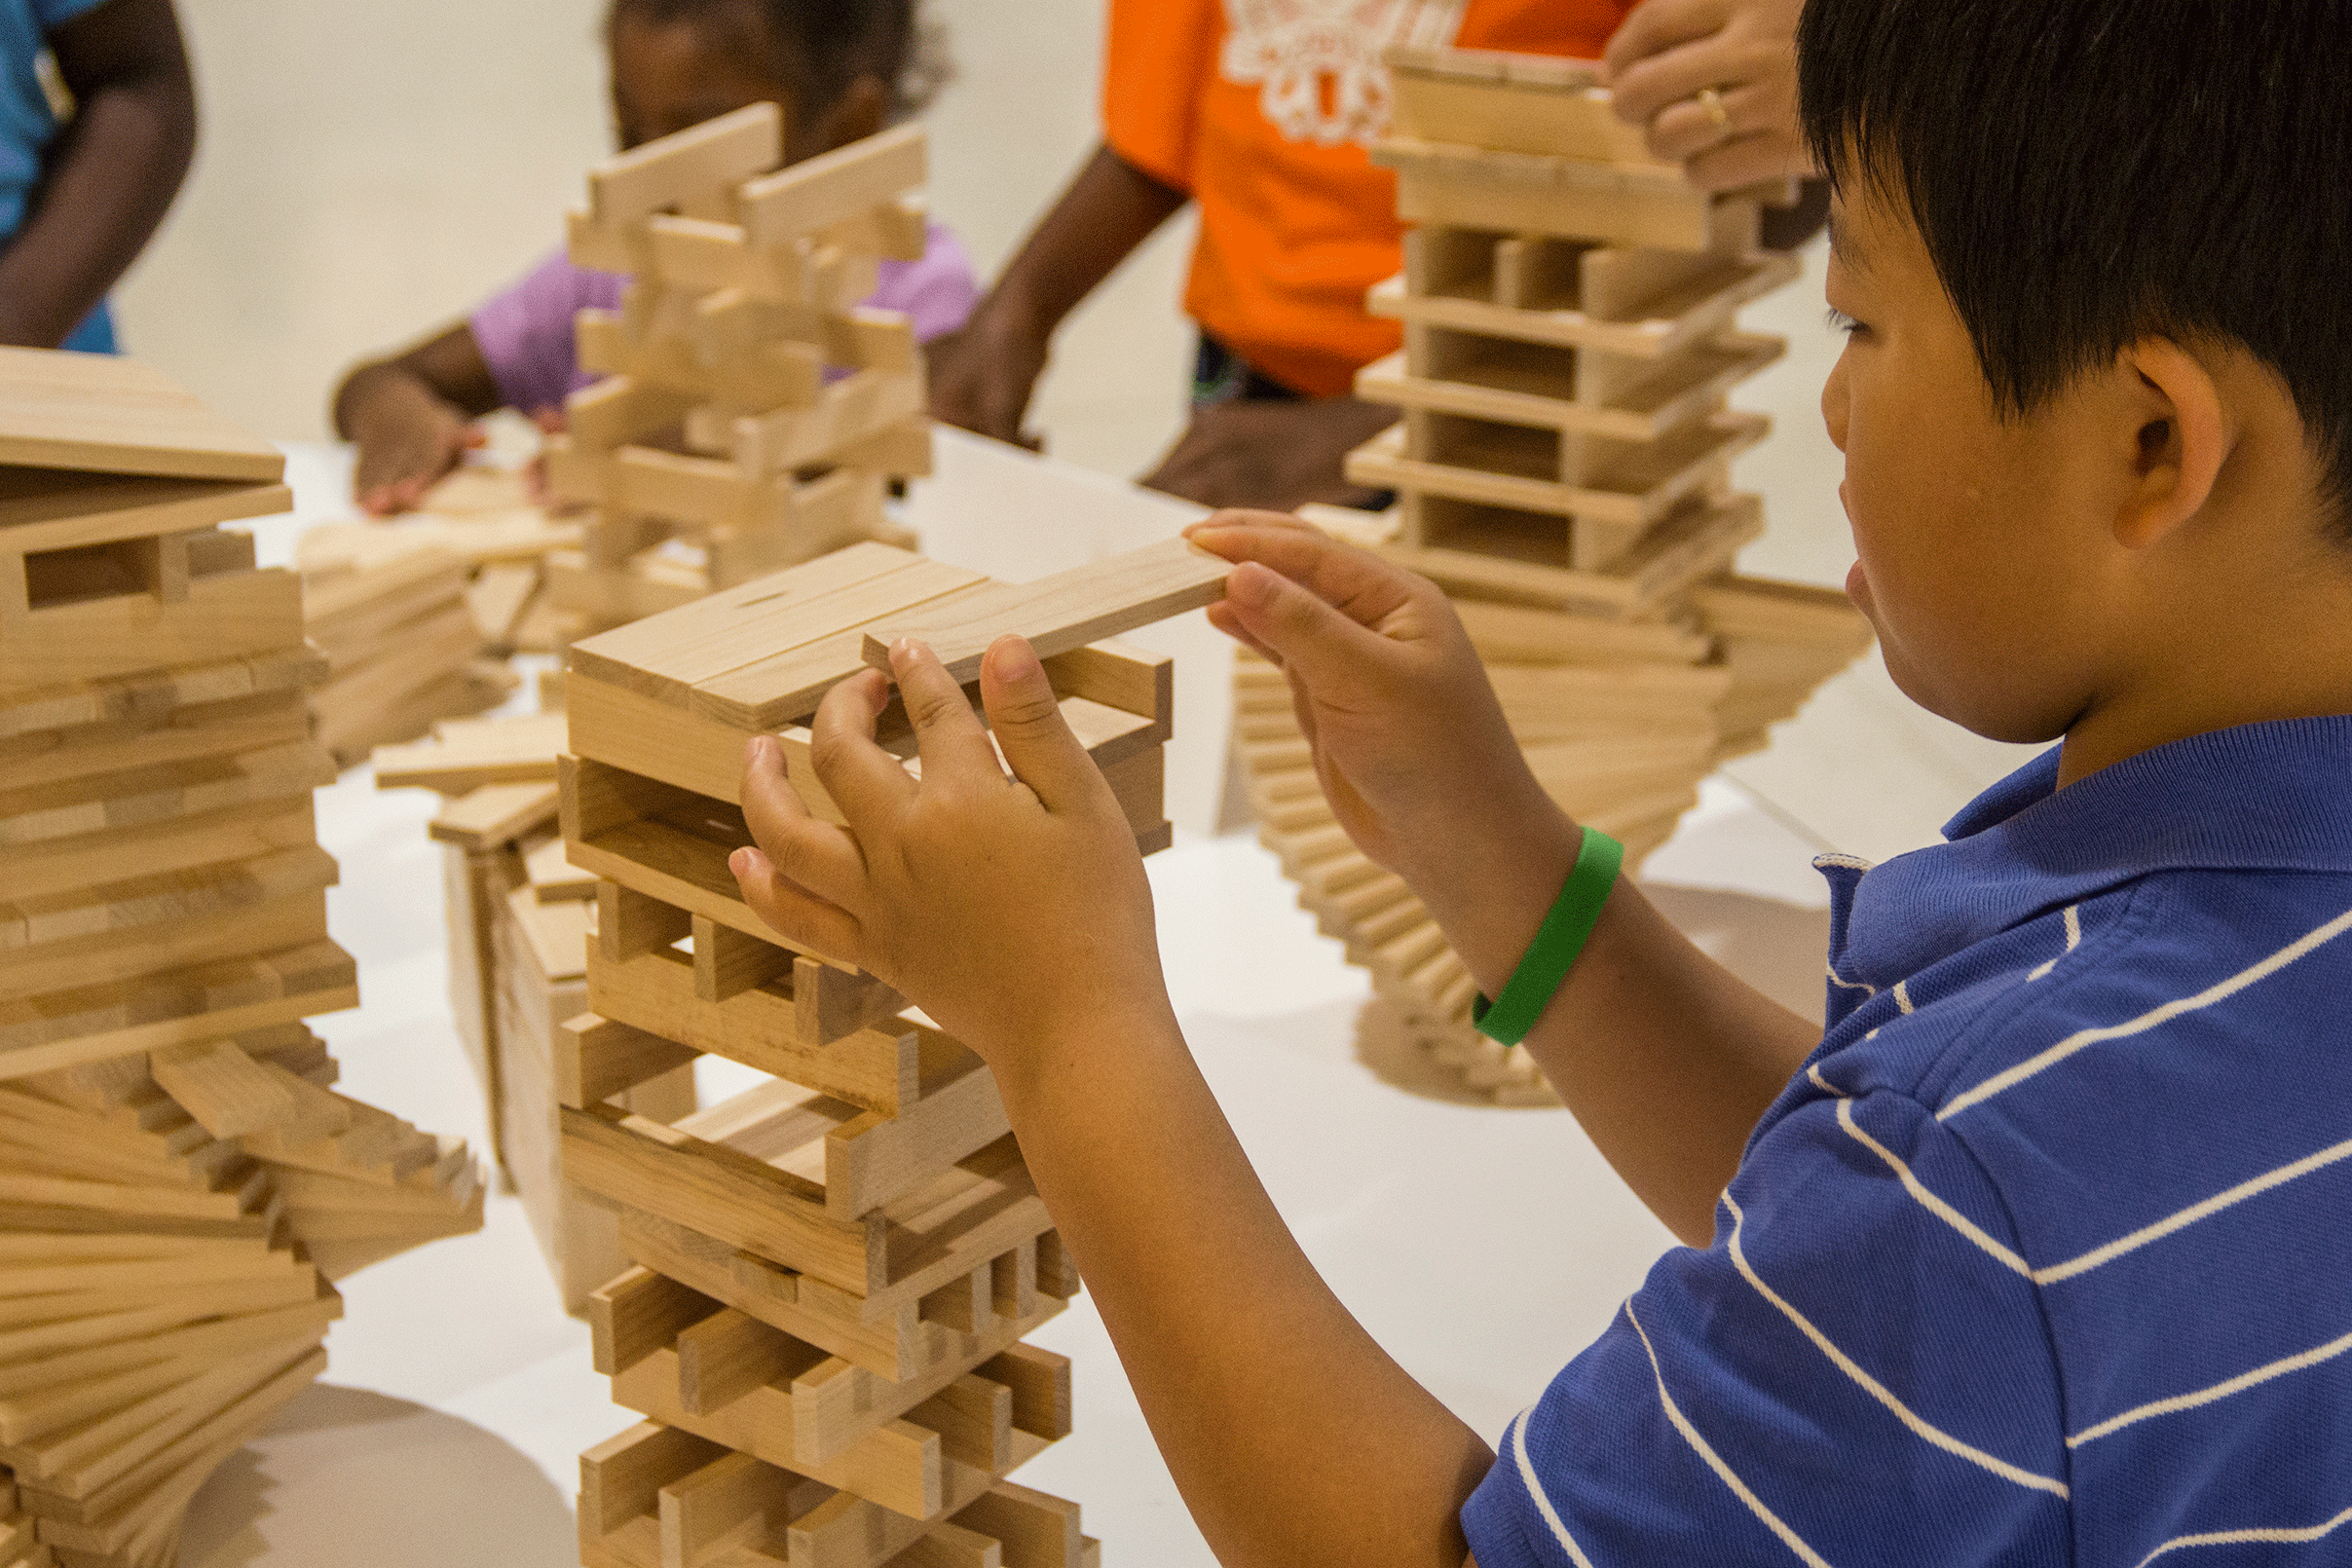 Play with Keva Planks from Richland Library